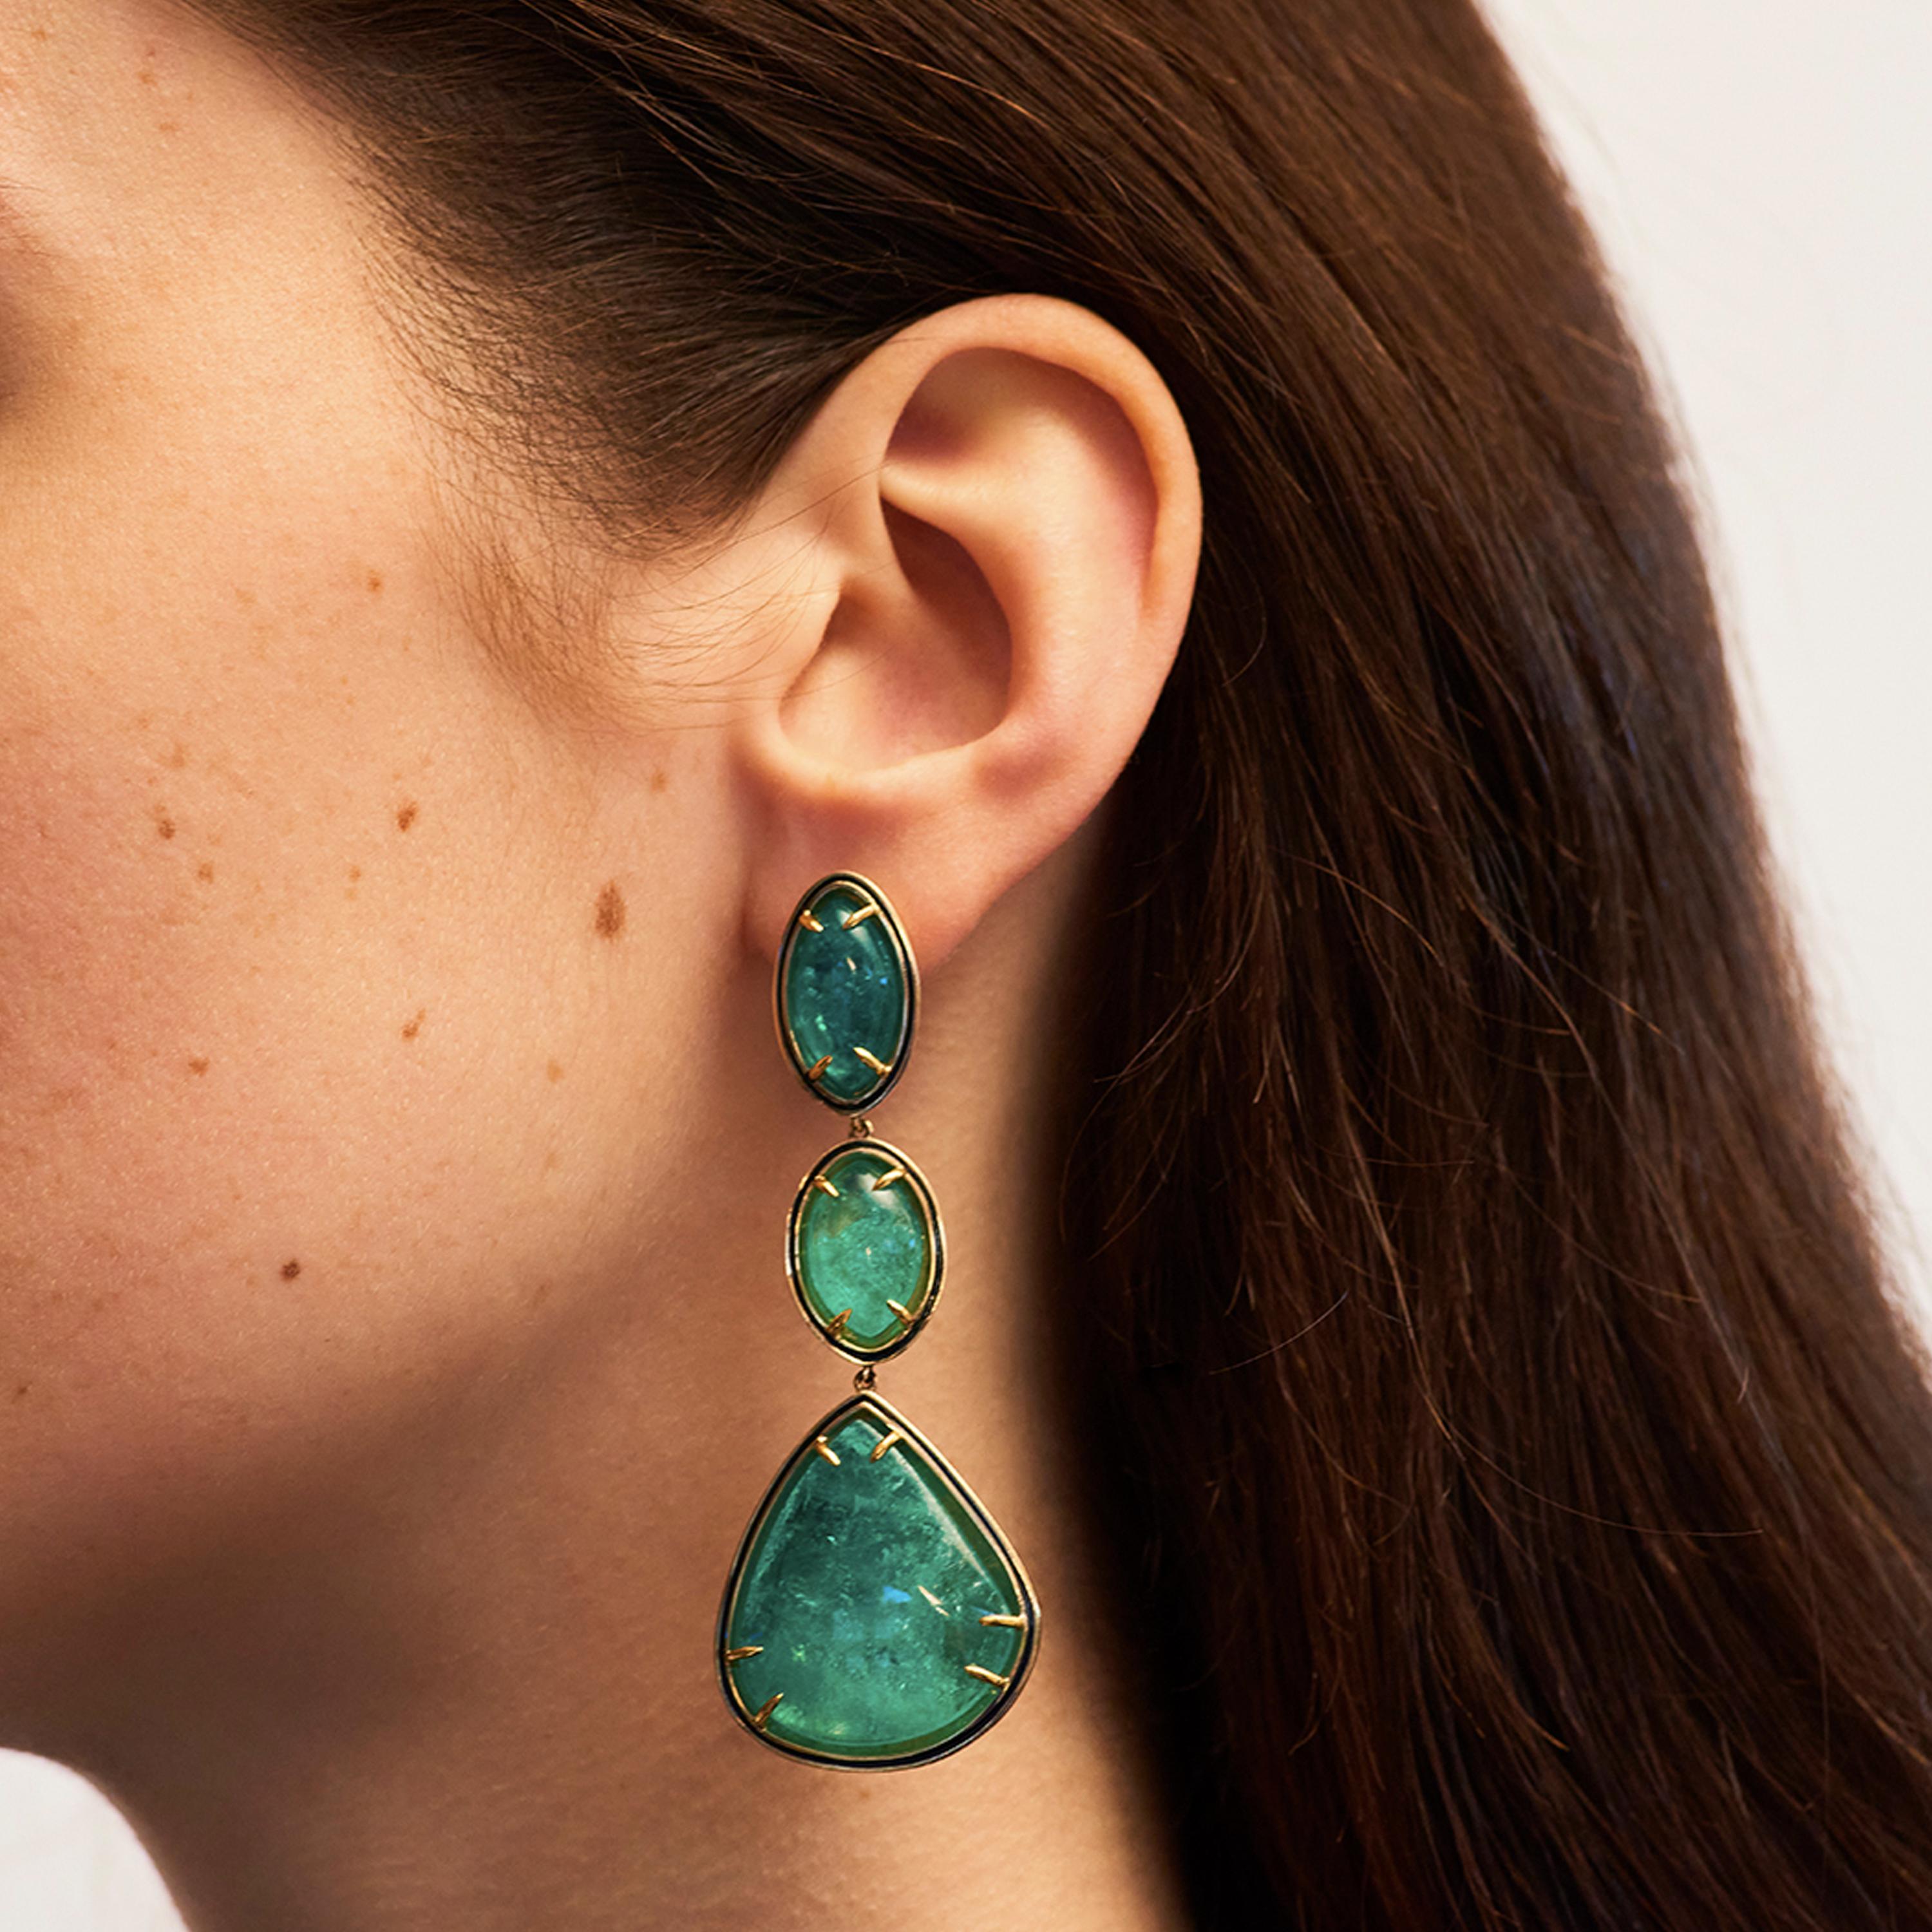 Alice Cicolini's Jaipur Muzo Colombian Emerald Wisteria Earrings feature three beautiful cabochon-cut Colombian Muzo emerald marquises, set in 14k yellow gold and white diamonds, graduating in size to form these drop earrings. The reverse features a